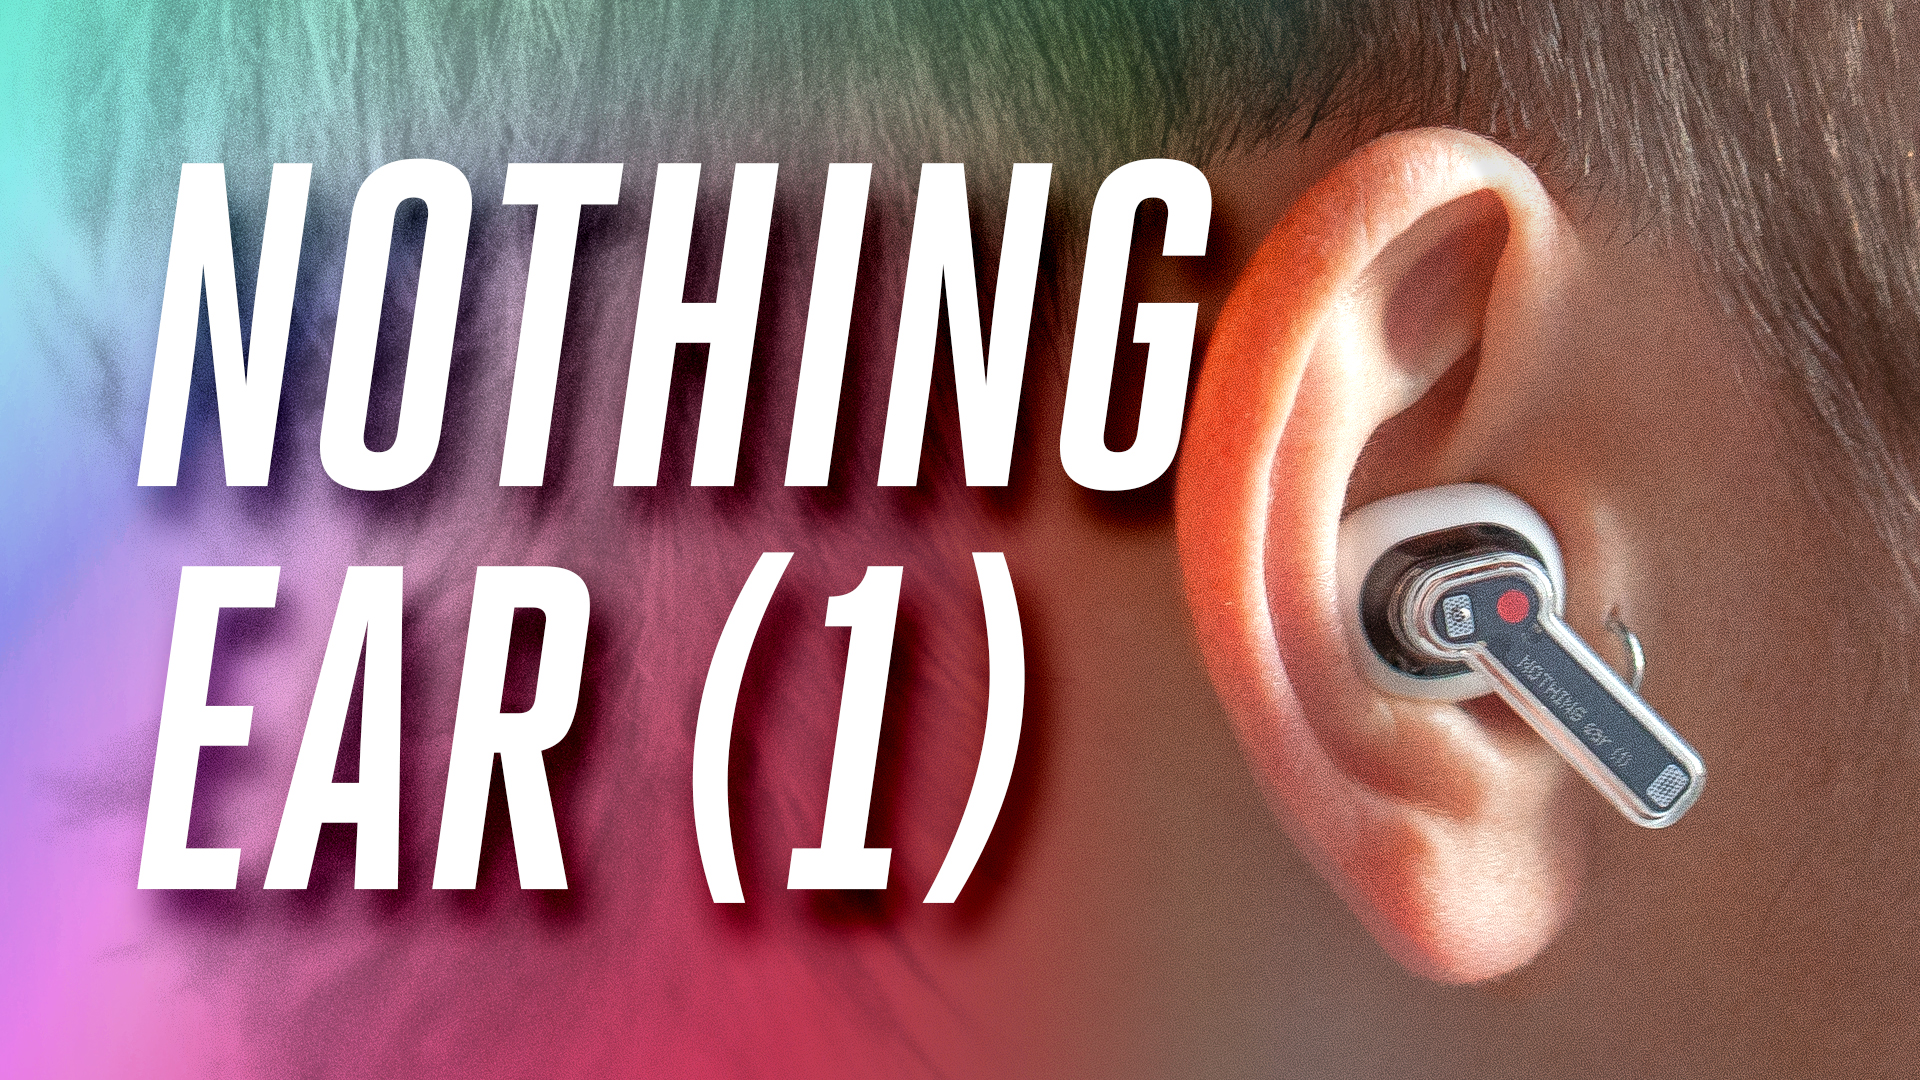 Nothing Ear (1): Reviewing The Sound Of Silence